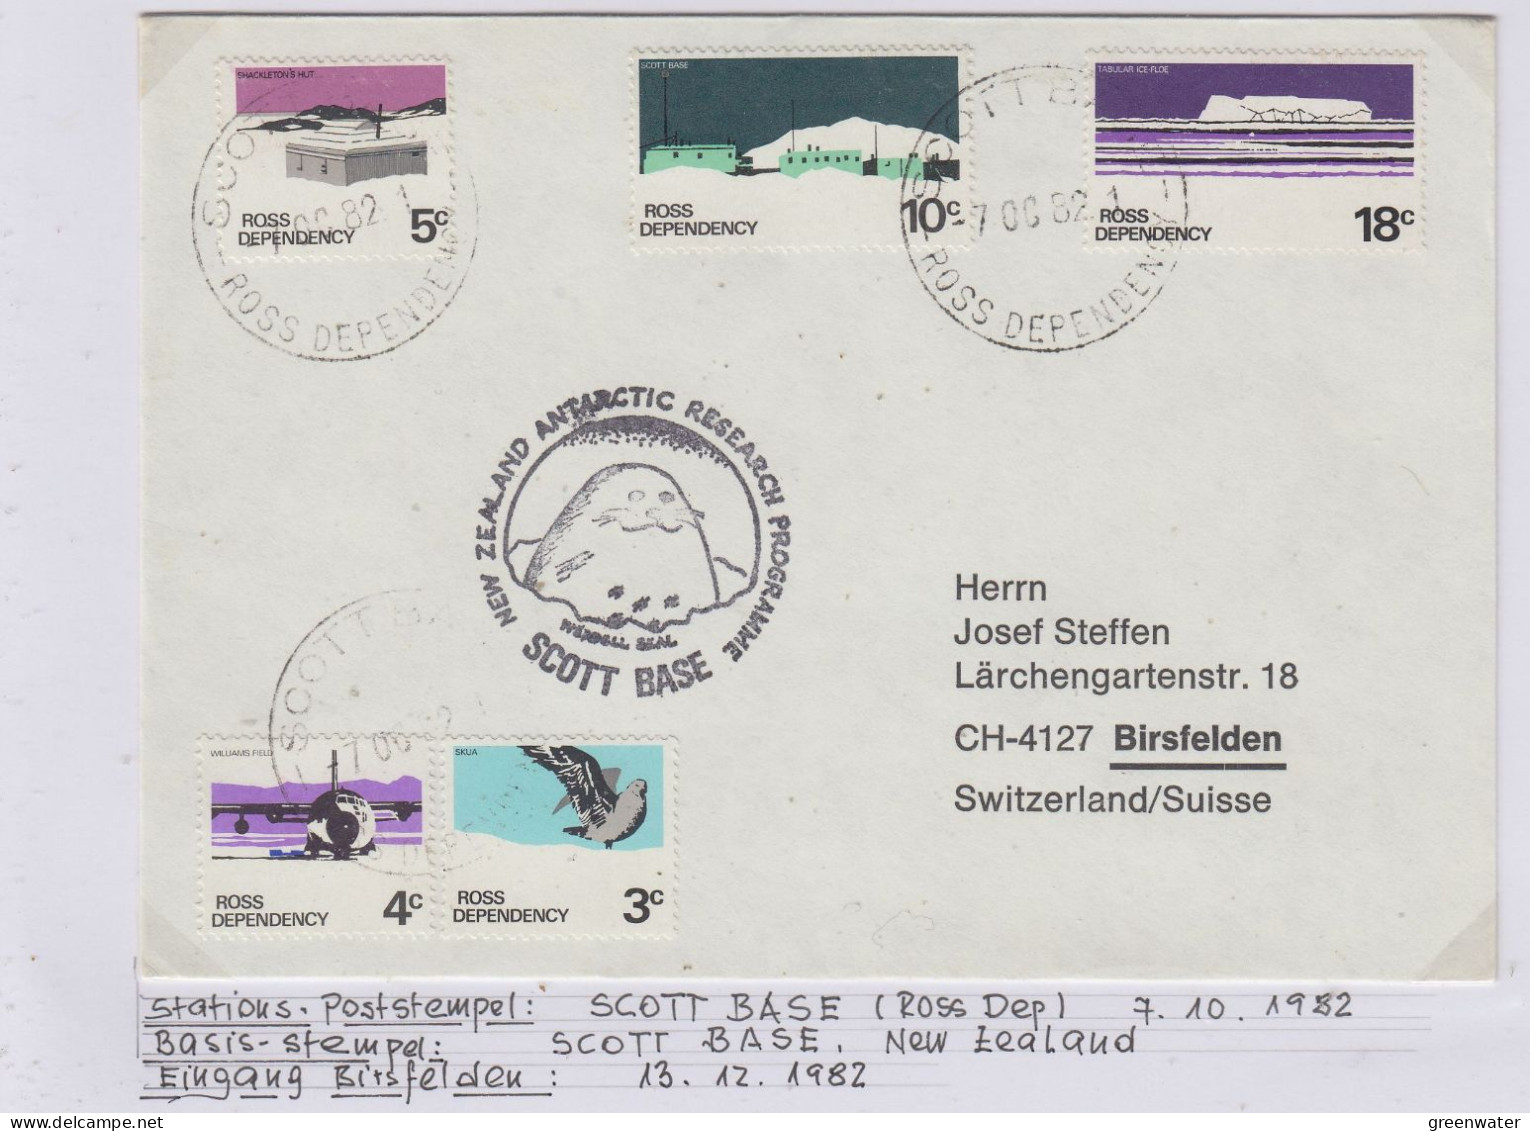 Ross Dependency Cover  NZ  Antarctic Research  Expedition Ca Scott Base 7 OCT 1982 (WB162A) - Covers & Documents